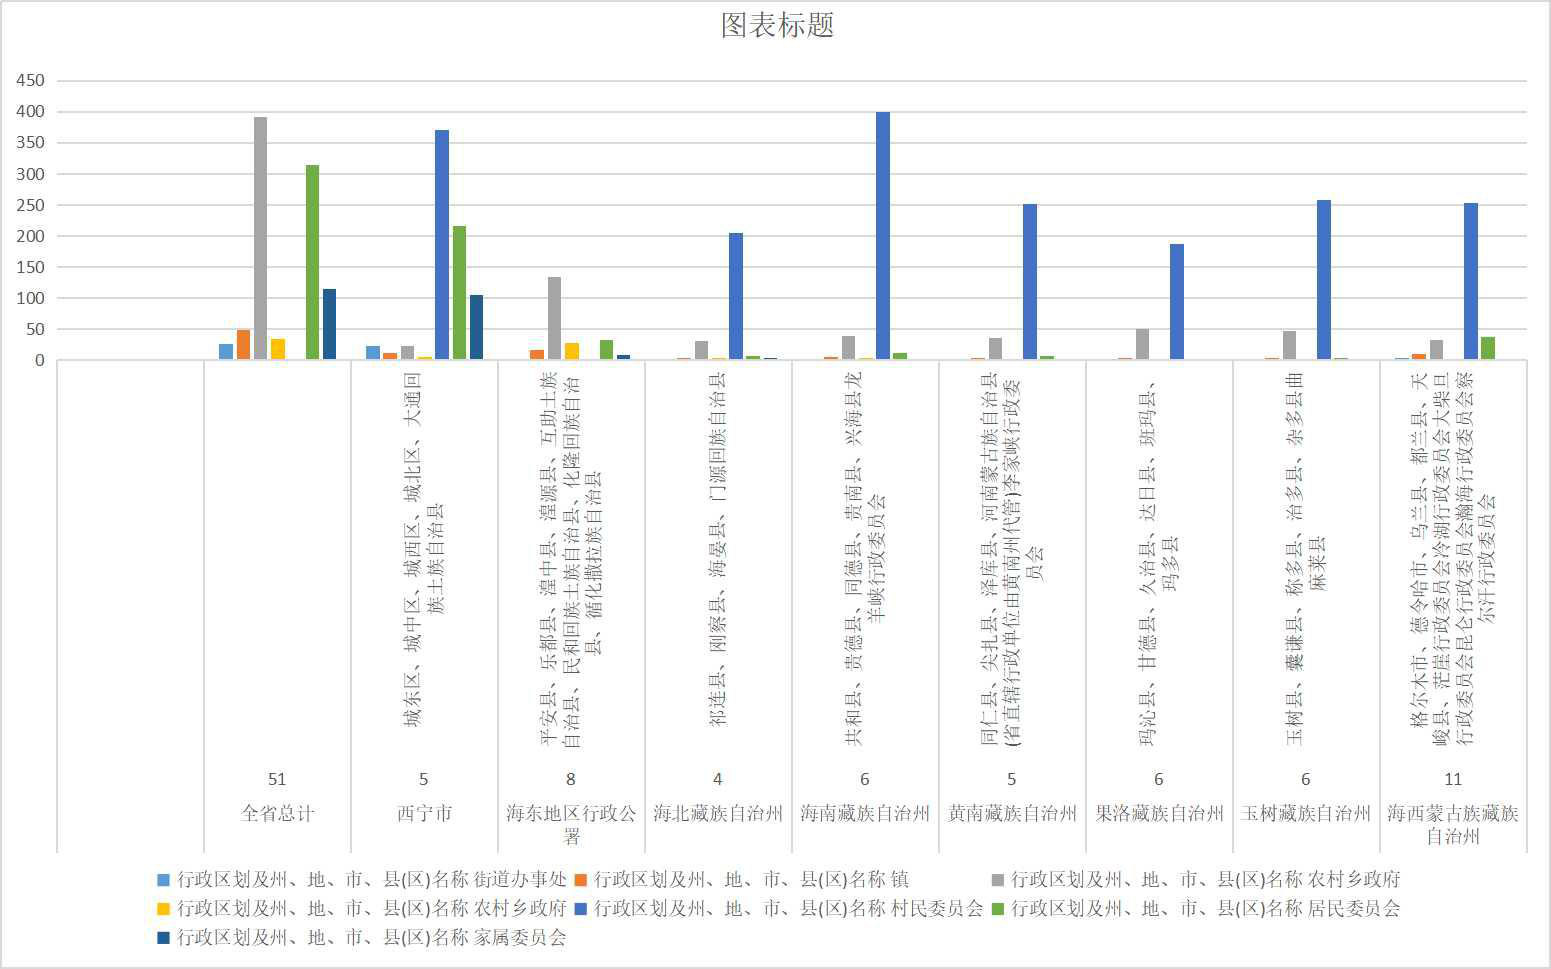 Administrative divisions and names of prefectures, prefectures, cities and counties (districts) in Qinghai Province (1998-2000)